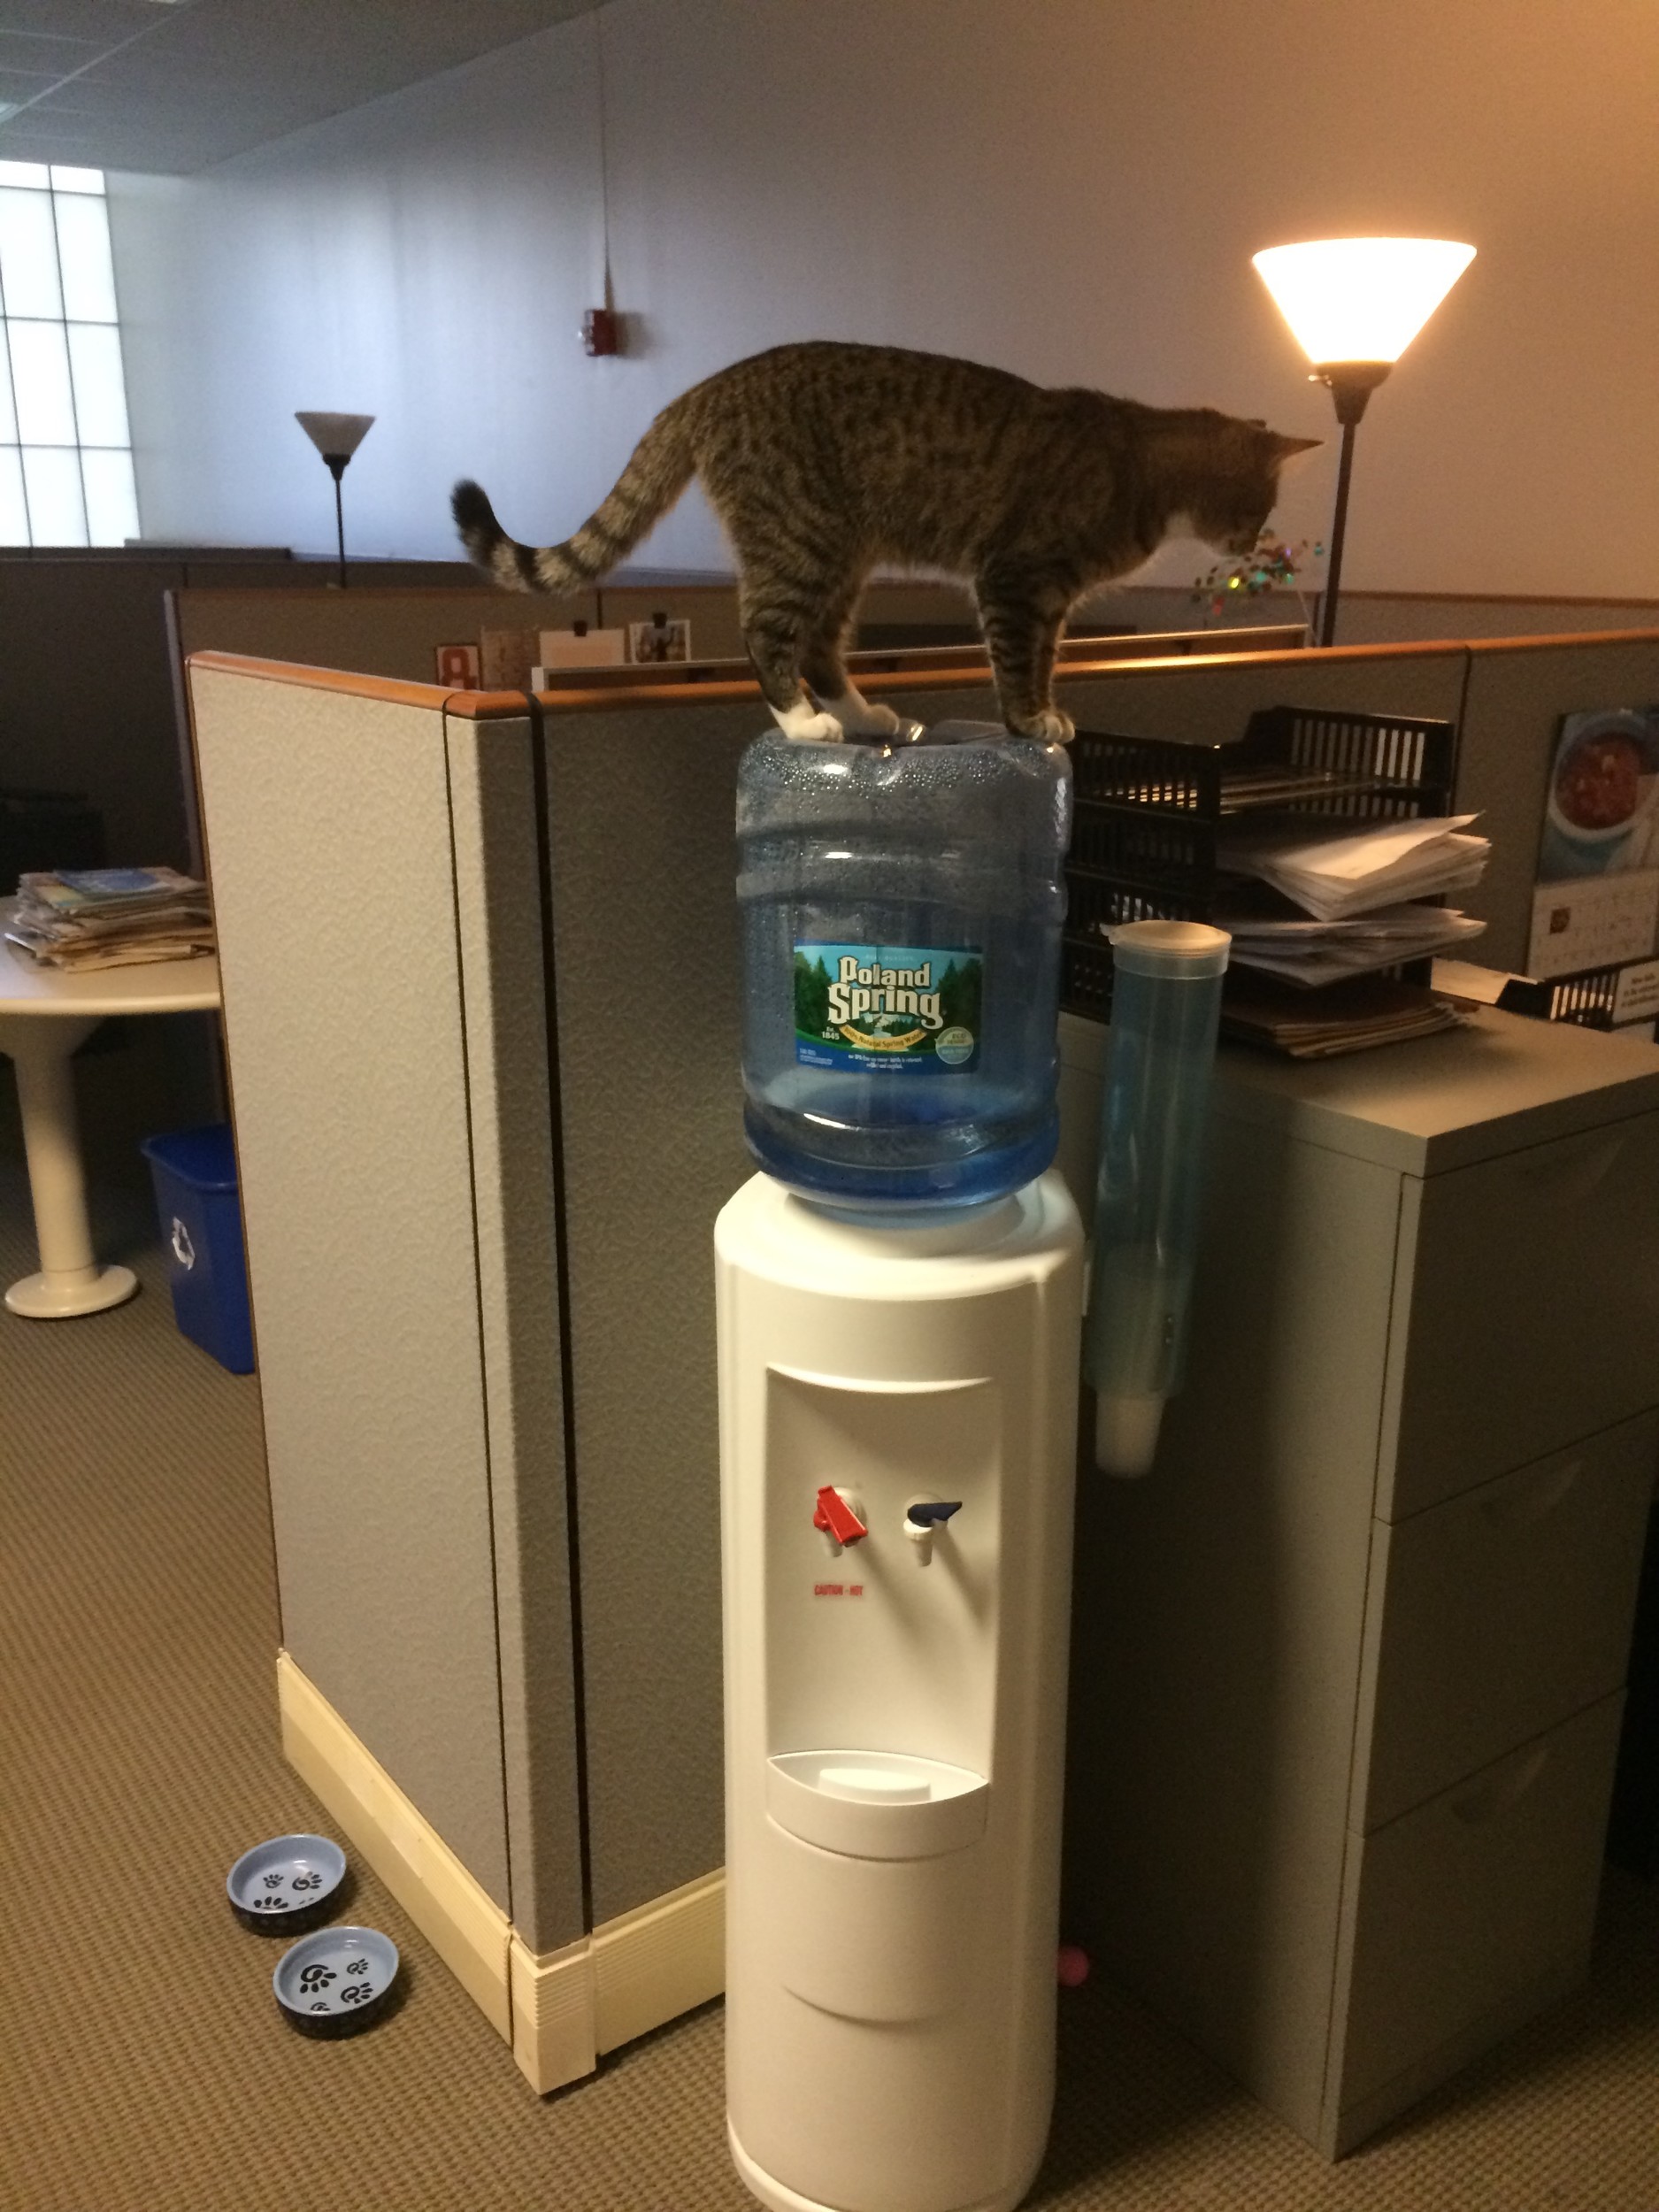 Hanging out at the water cooler waiting for company. . .